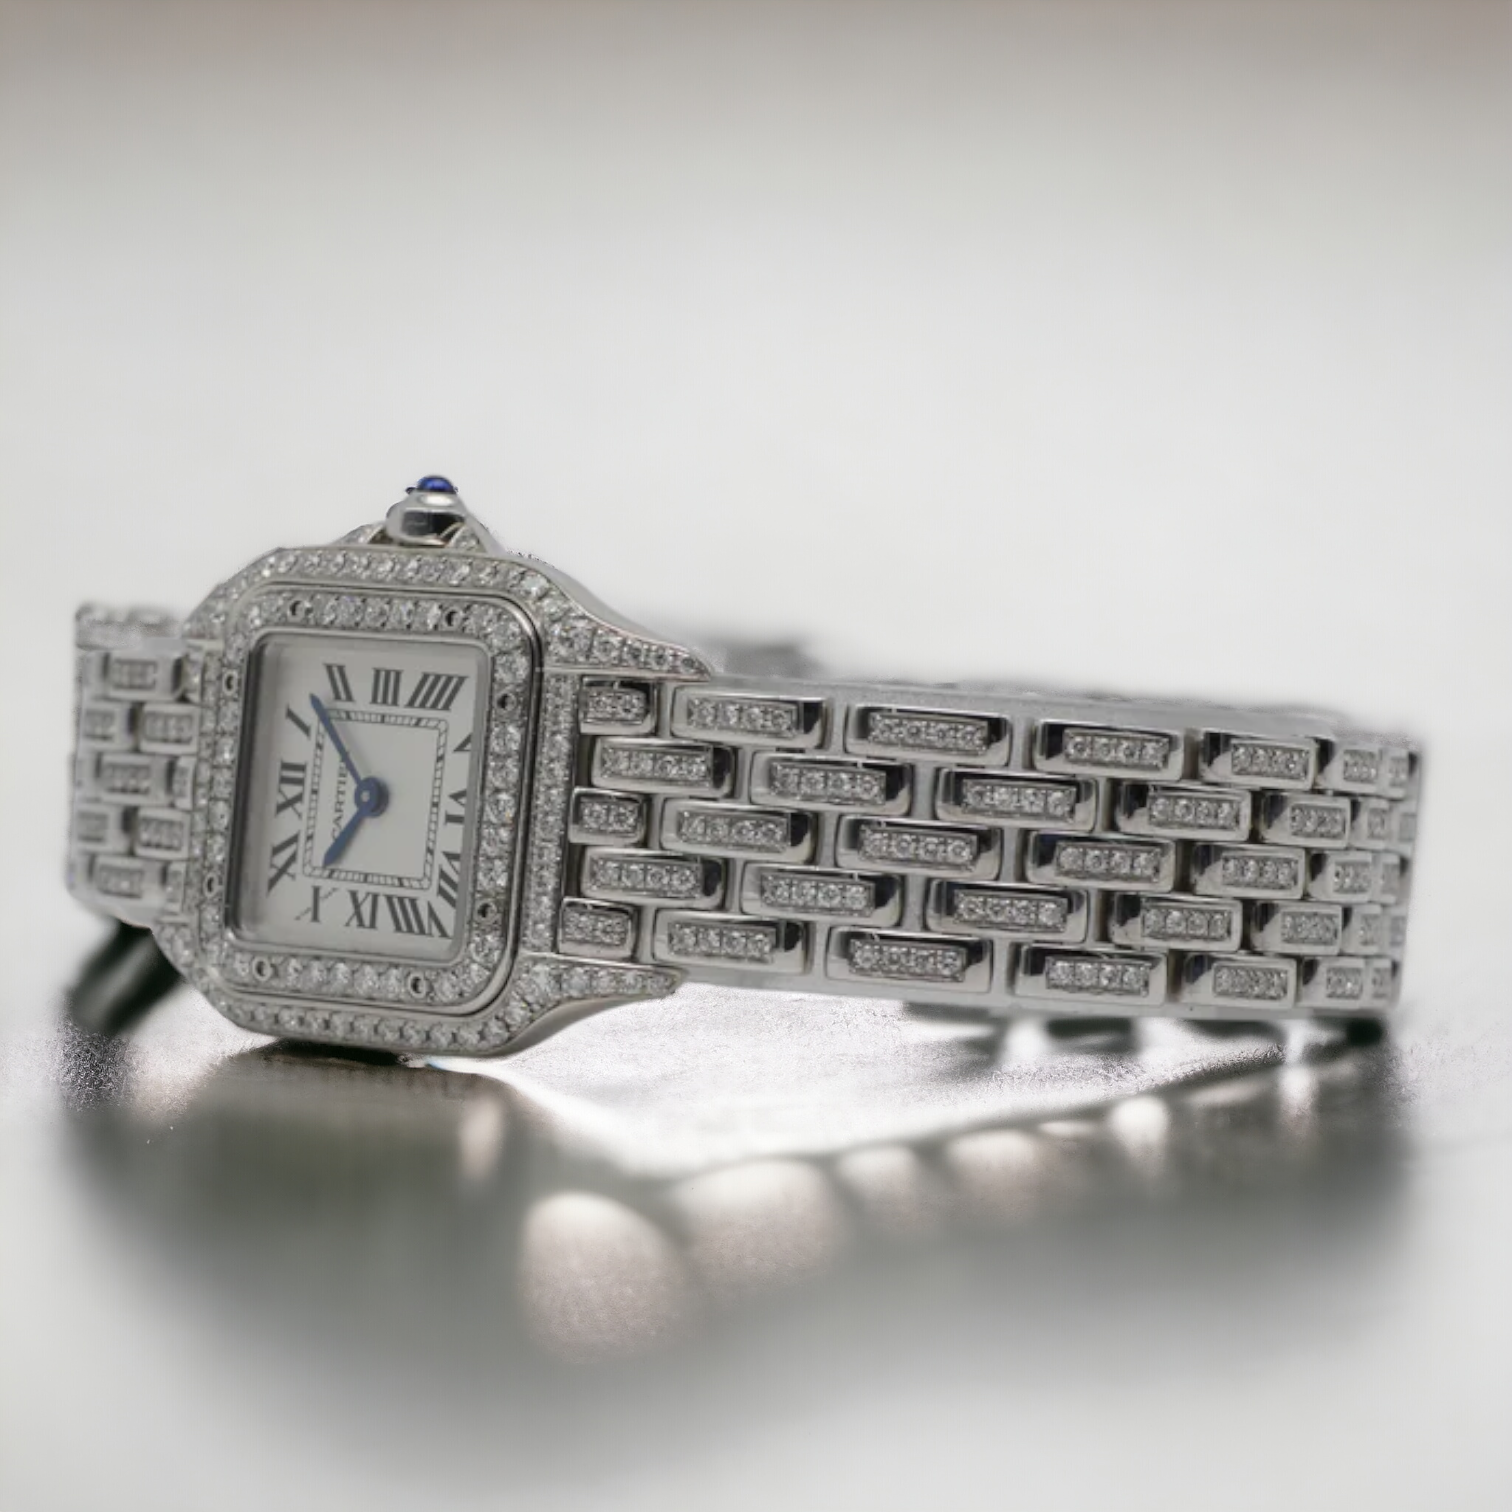 Cartier Panthère WSPN0006 Panthere Steel Custom Diamond-Set Iced Out